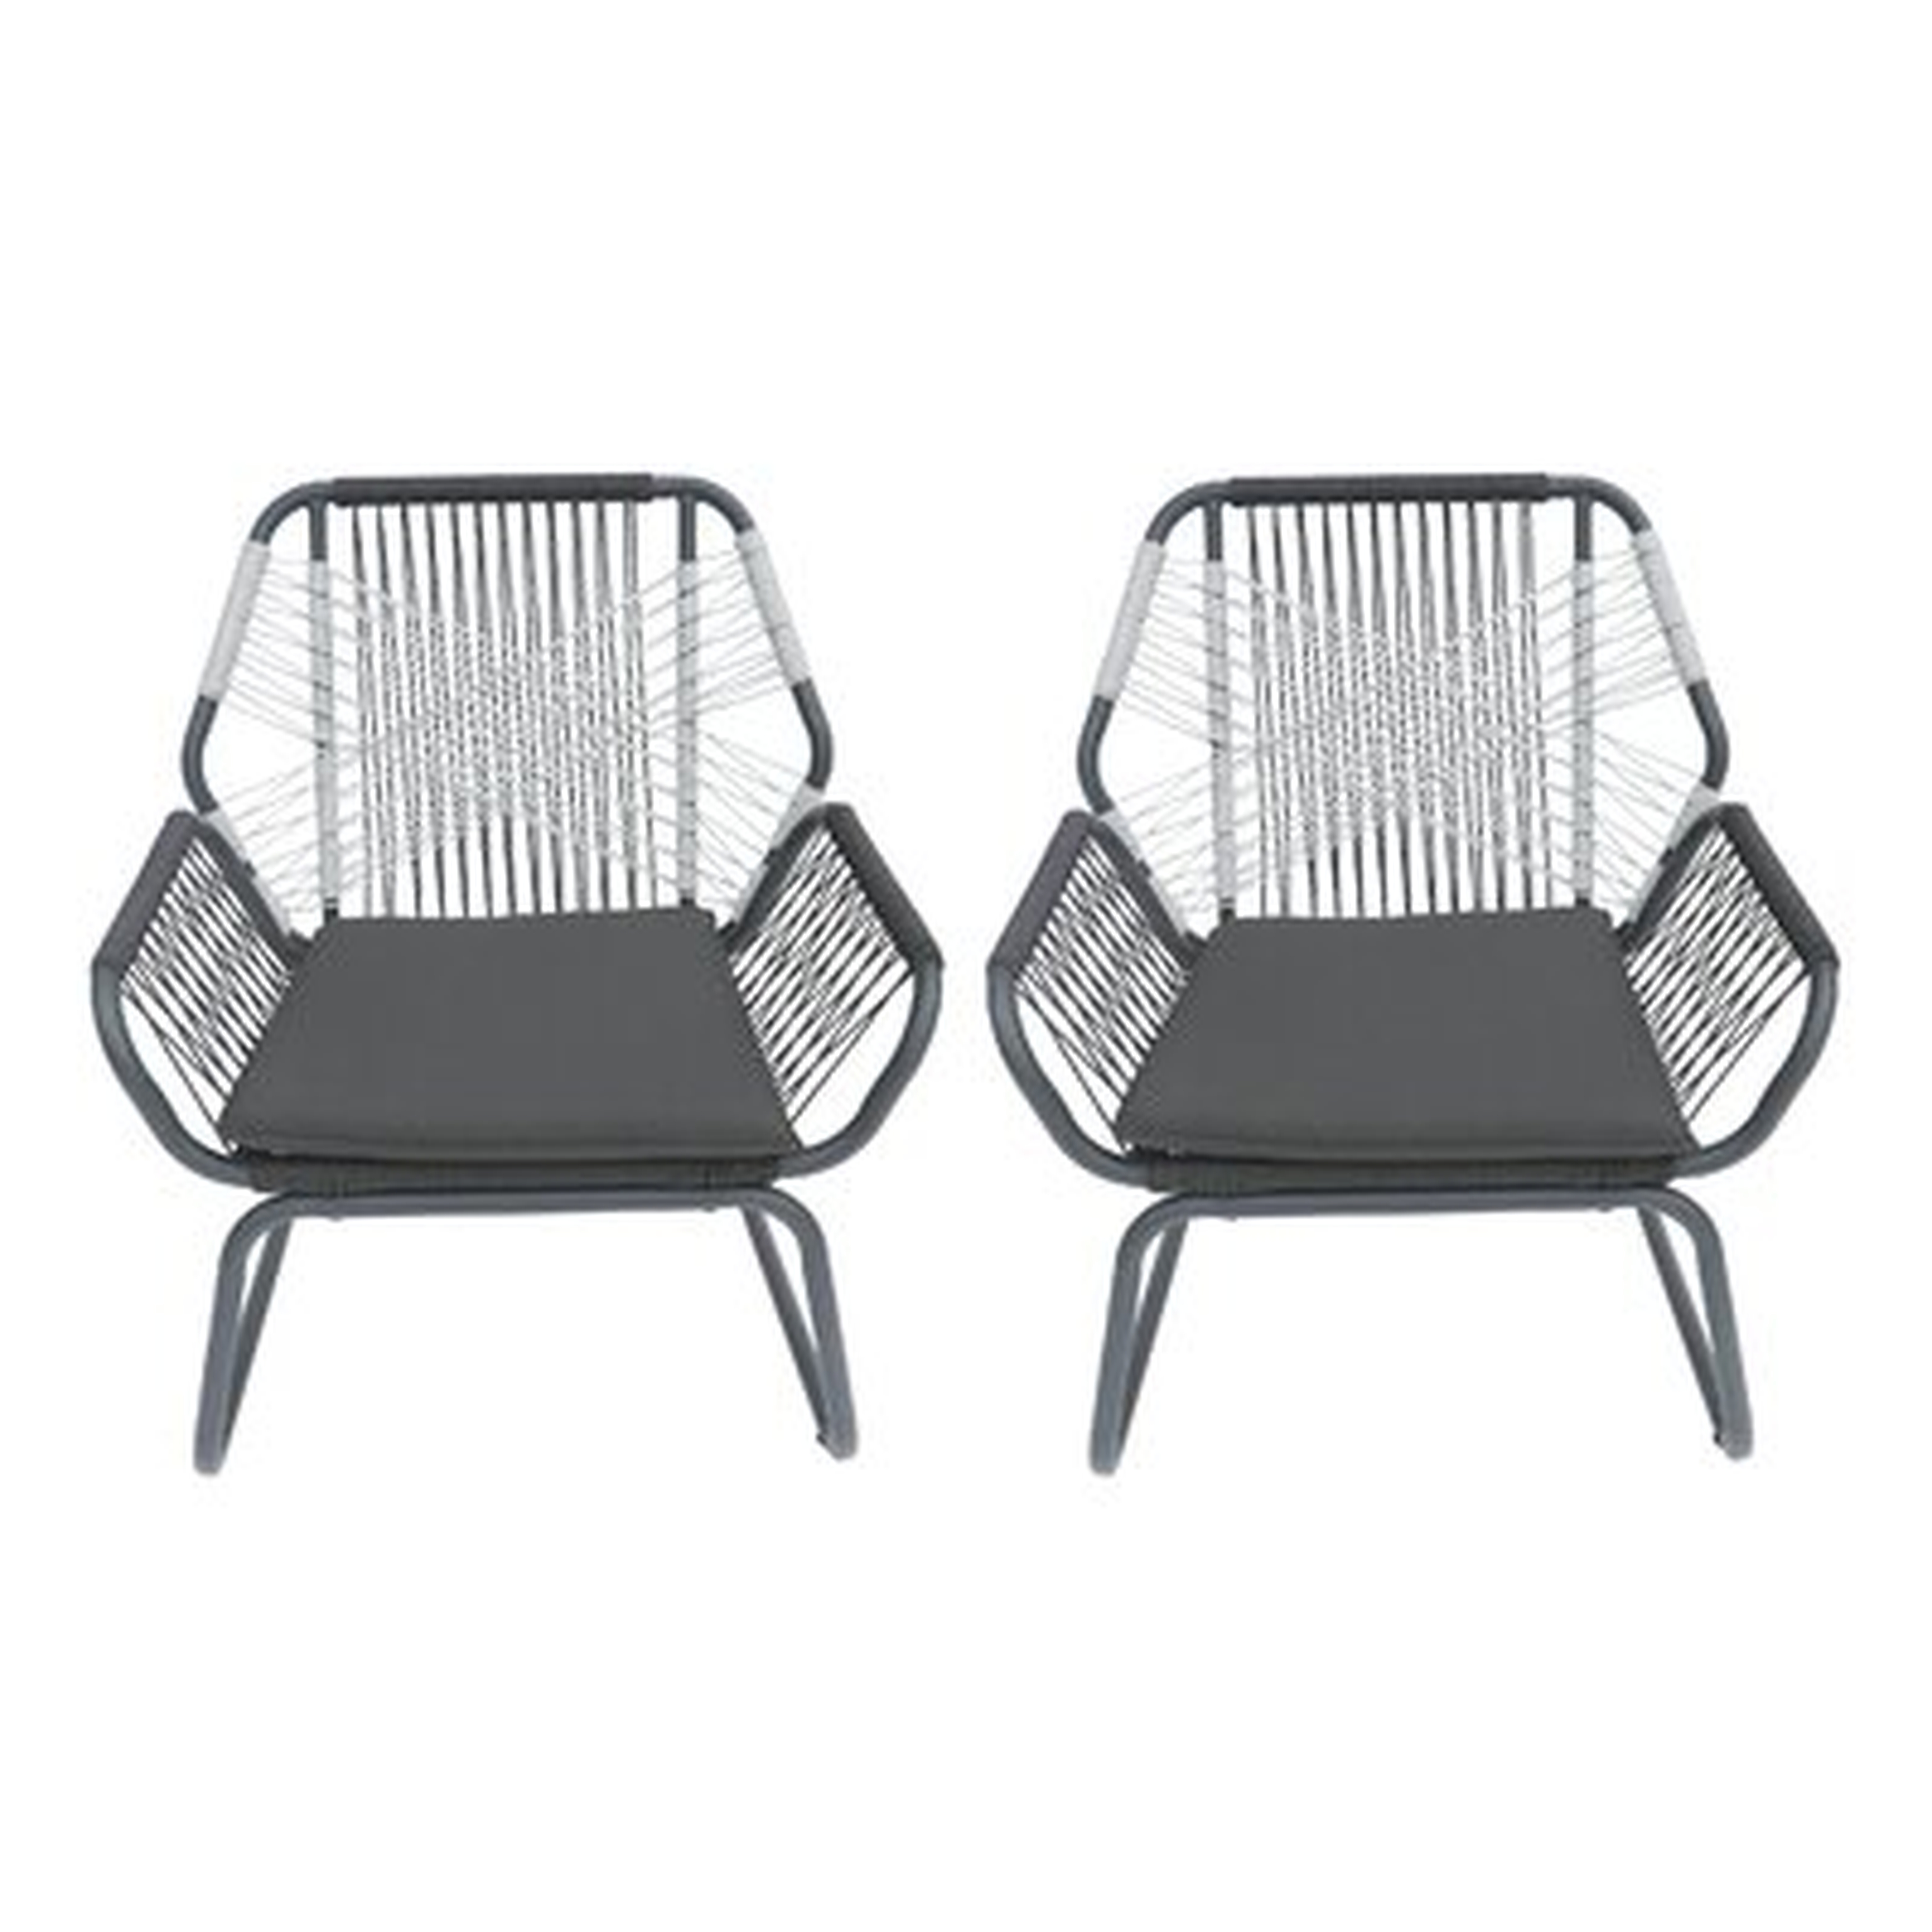 Gordonsville Patio Chair with Cushions (set of 2) - AllModern